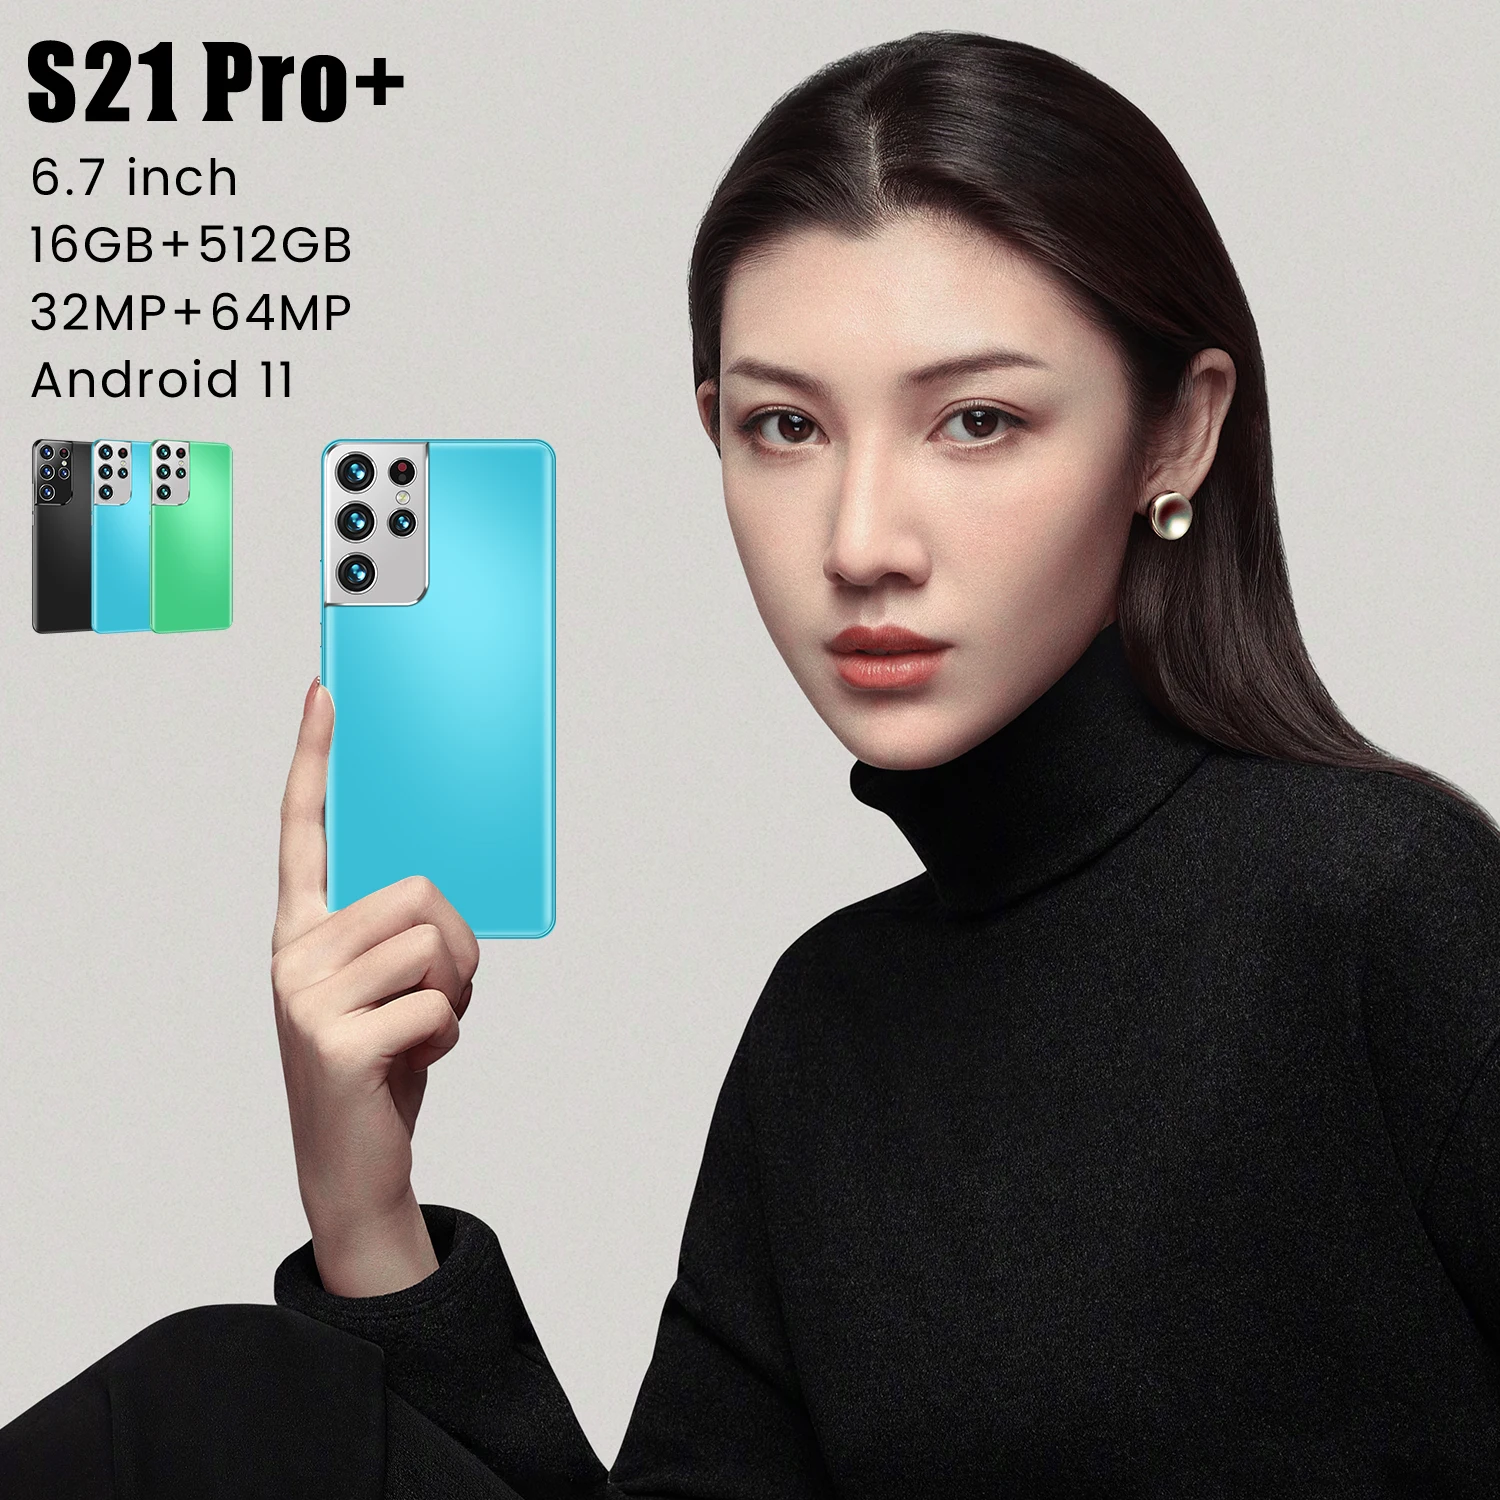 global version new 5g smartphone 16gb512gb for samsung galaxy s21 pro cellphone triple card slot huawei xiaomi mobile phone free global shipping